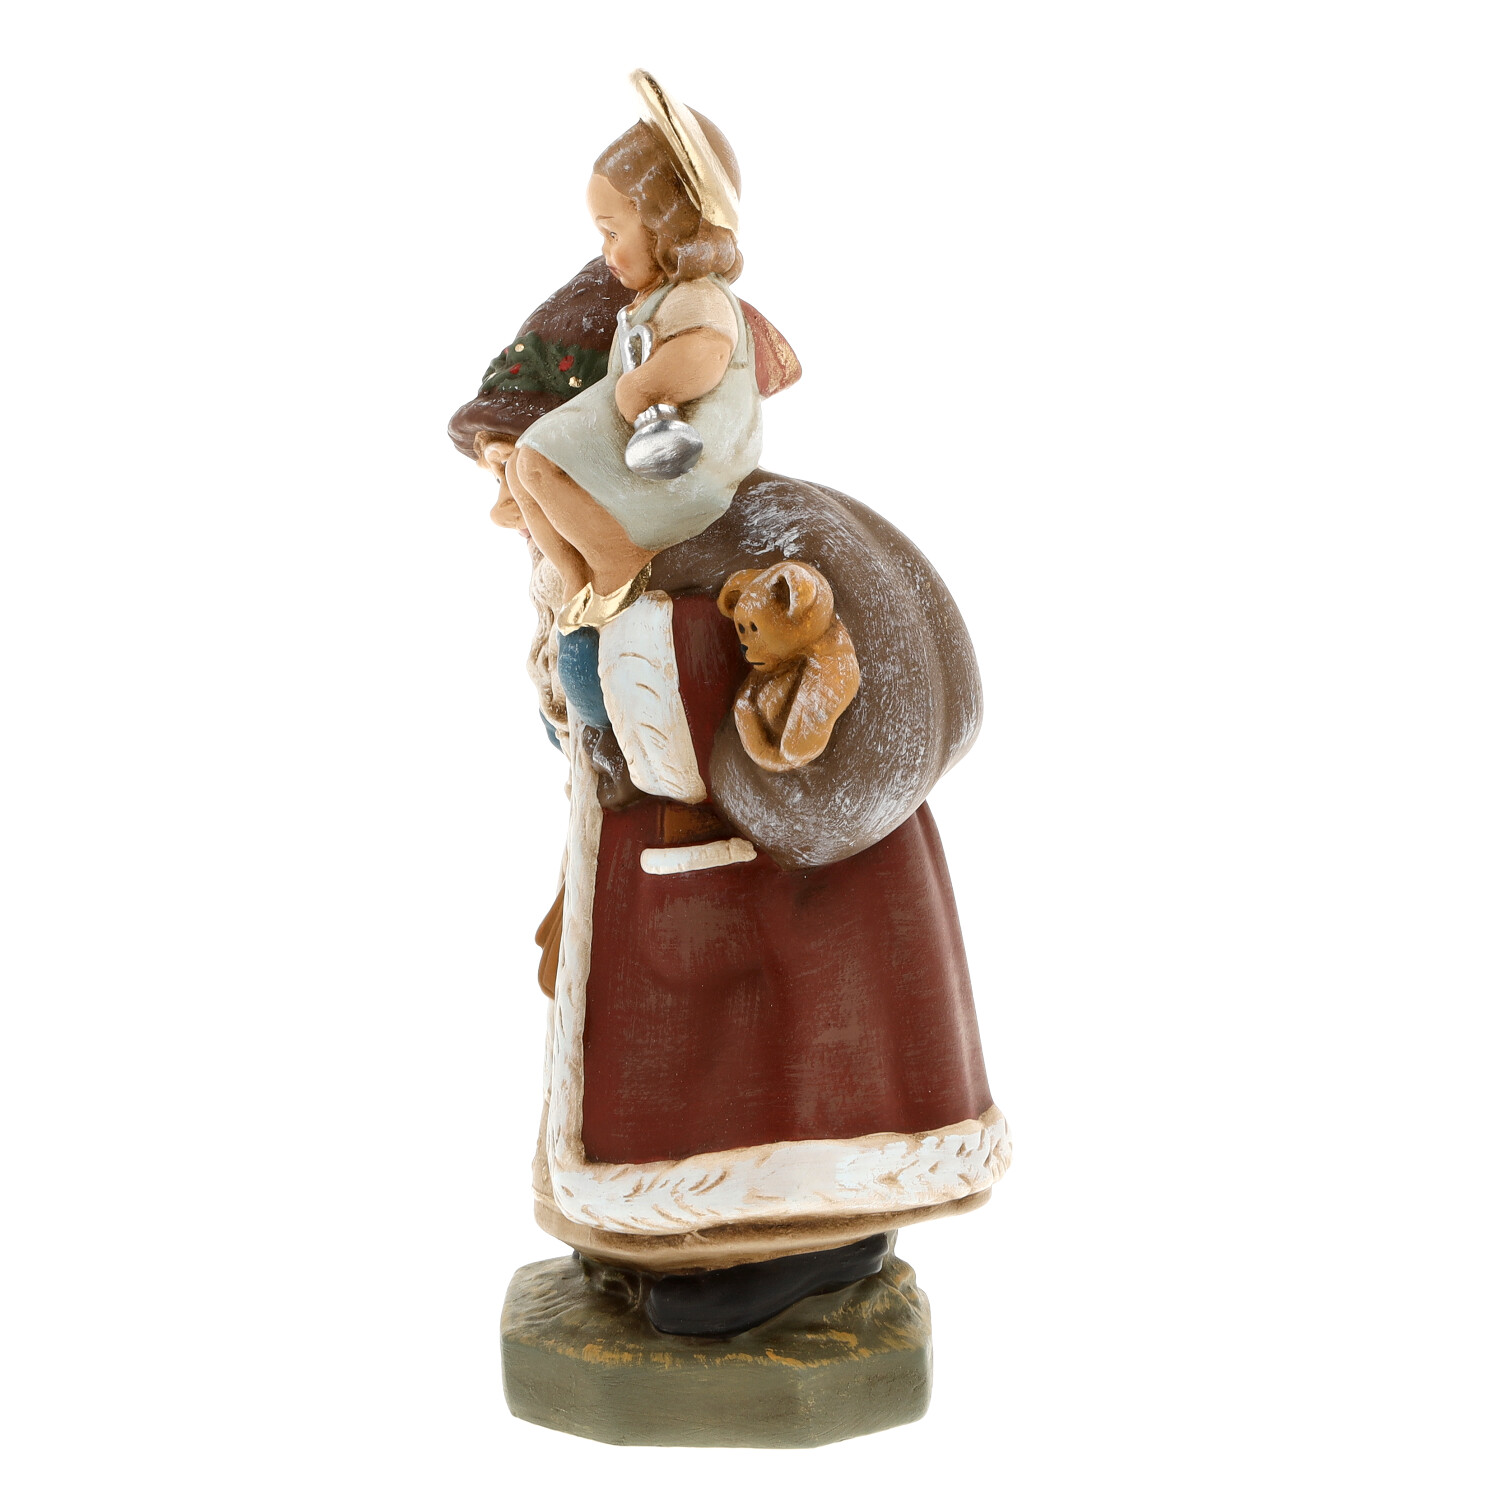 Santa with Christ child on shoulder - made in Germany